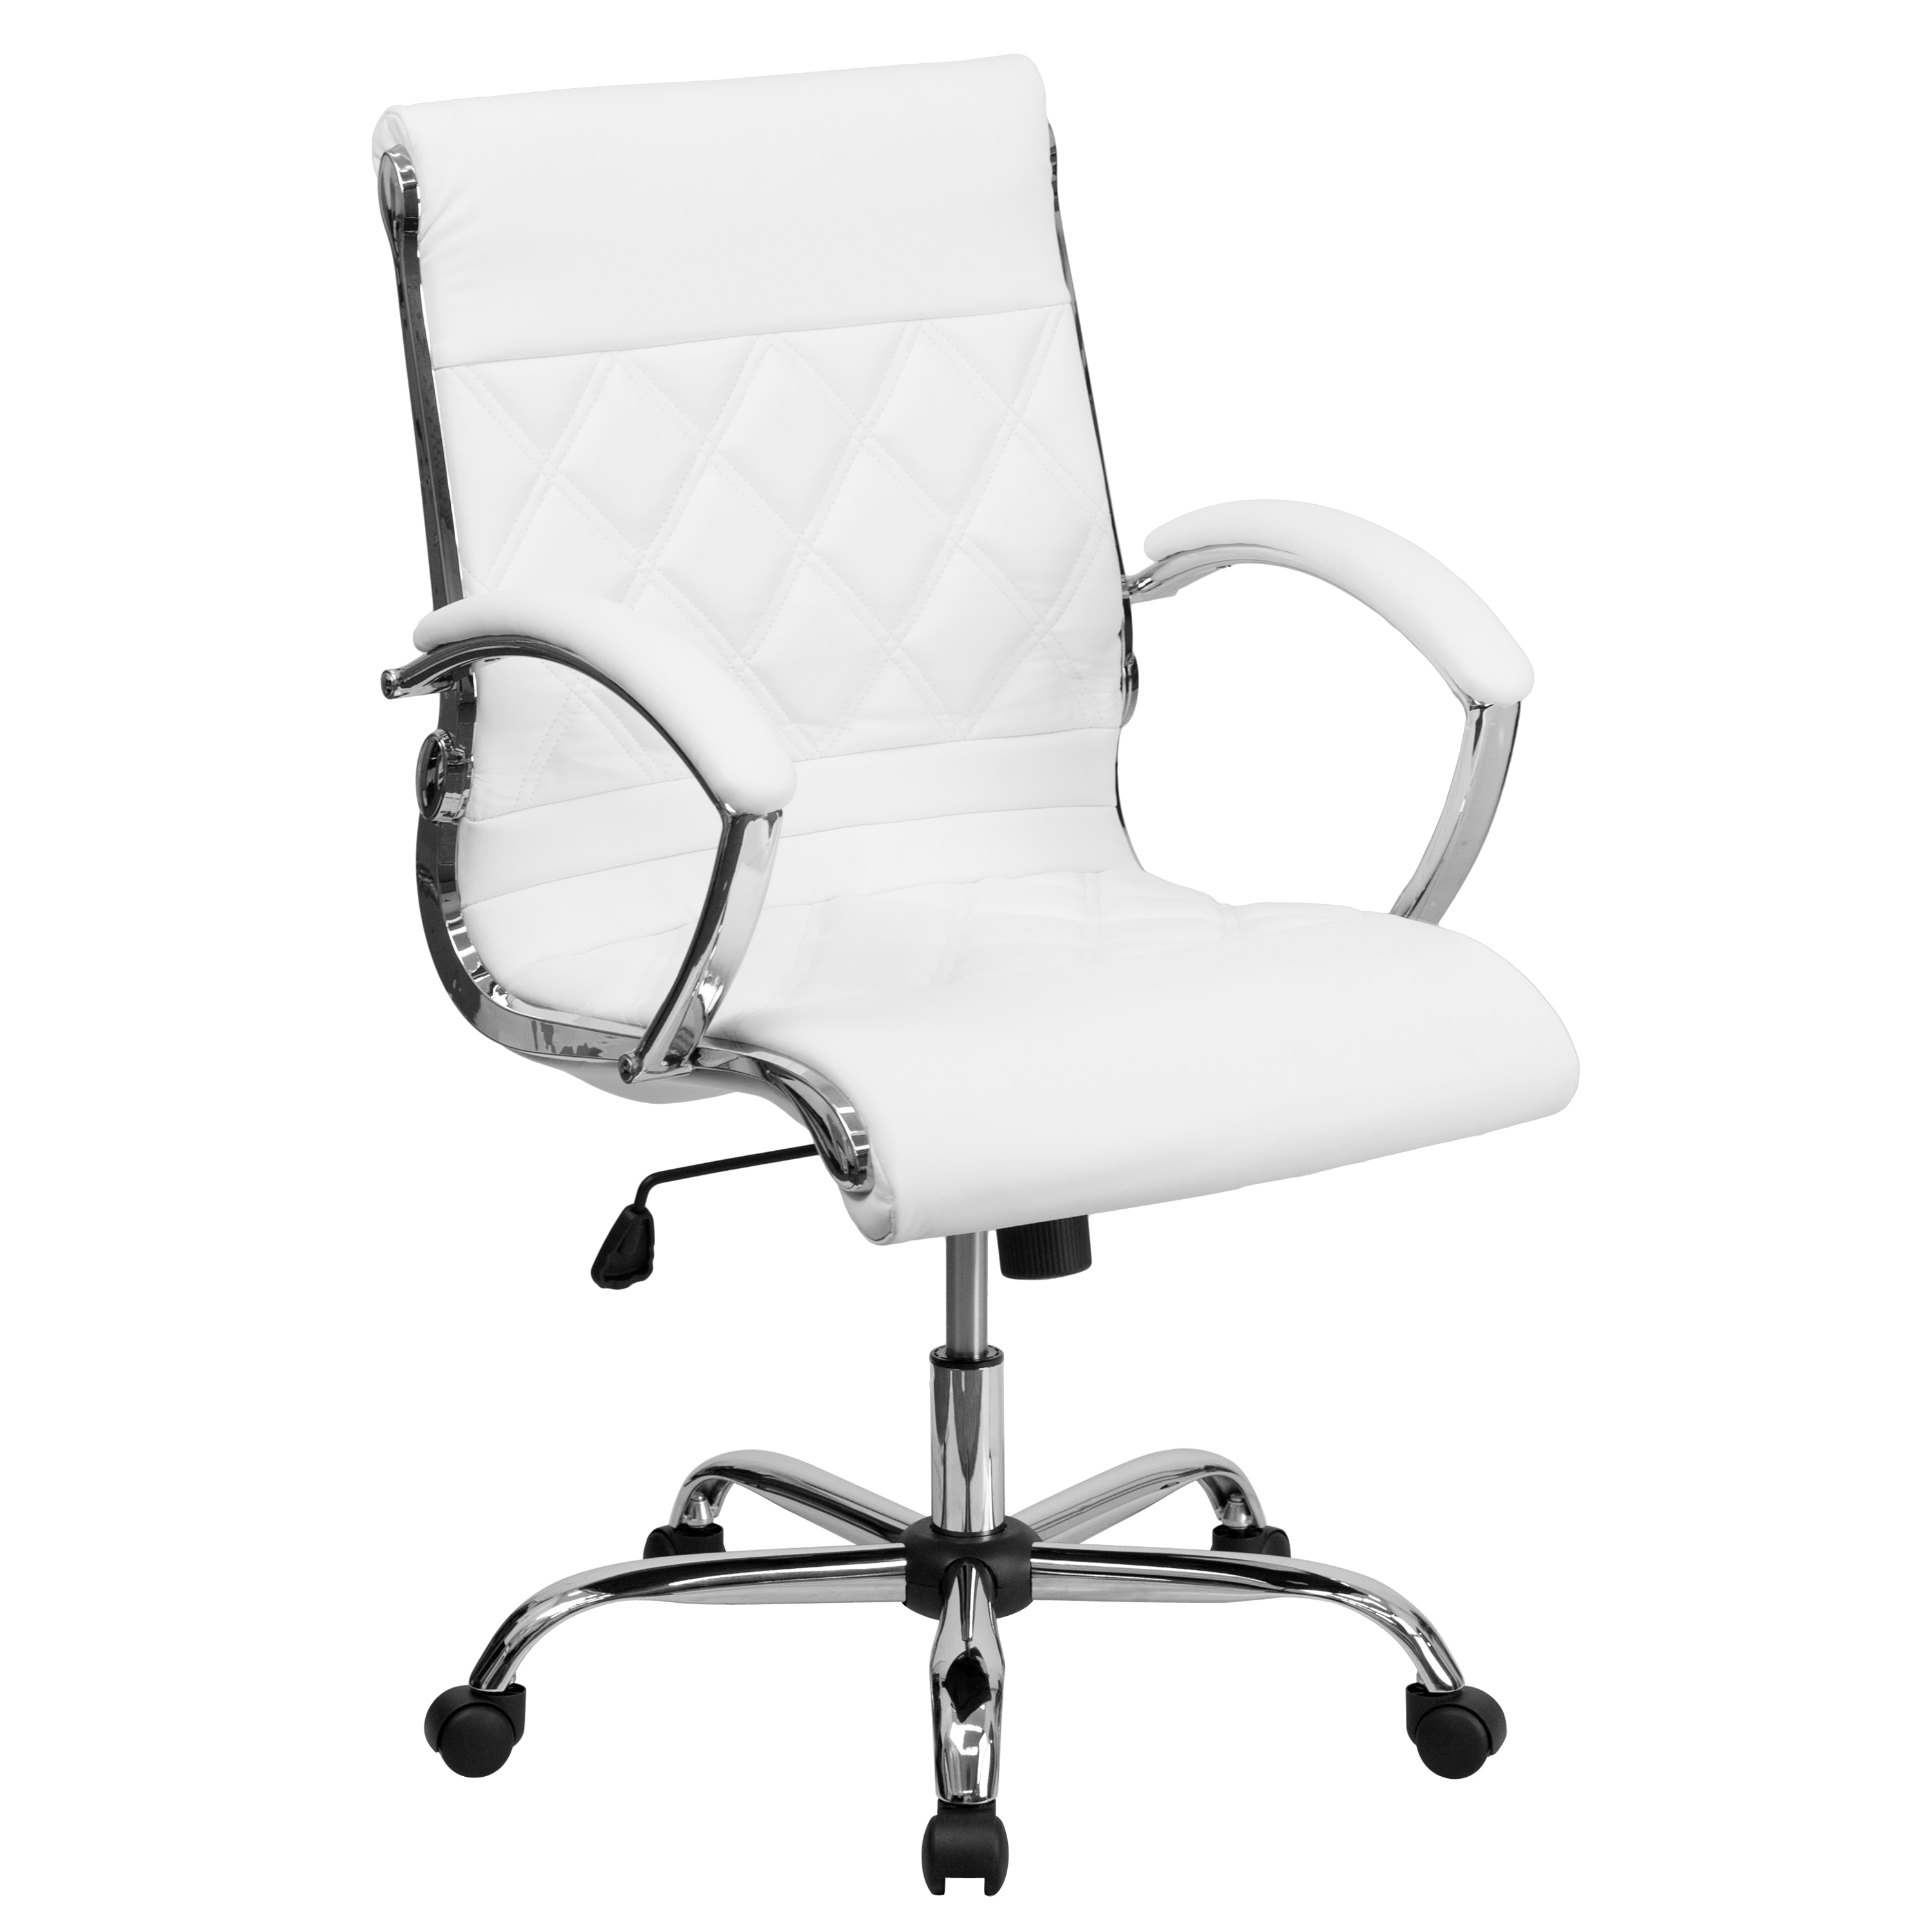 Shop Designer Mid Back Diamond Patterned White Leather Executive Adjustable Swivel Office Chair Overstock 11528065